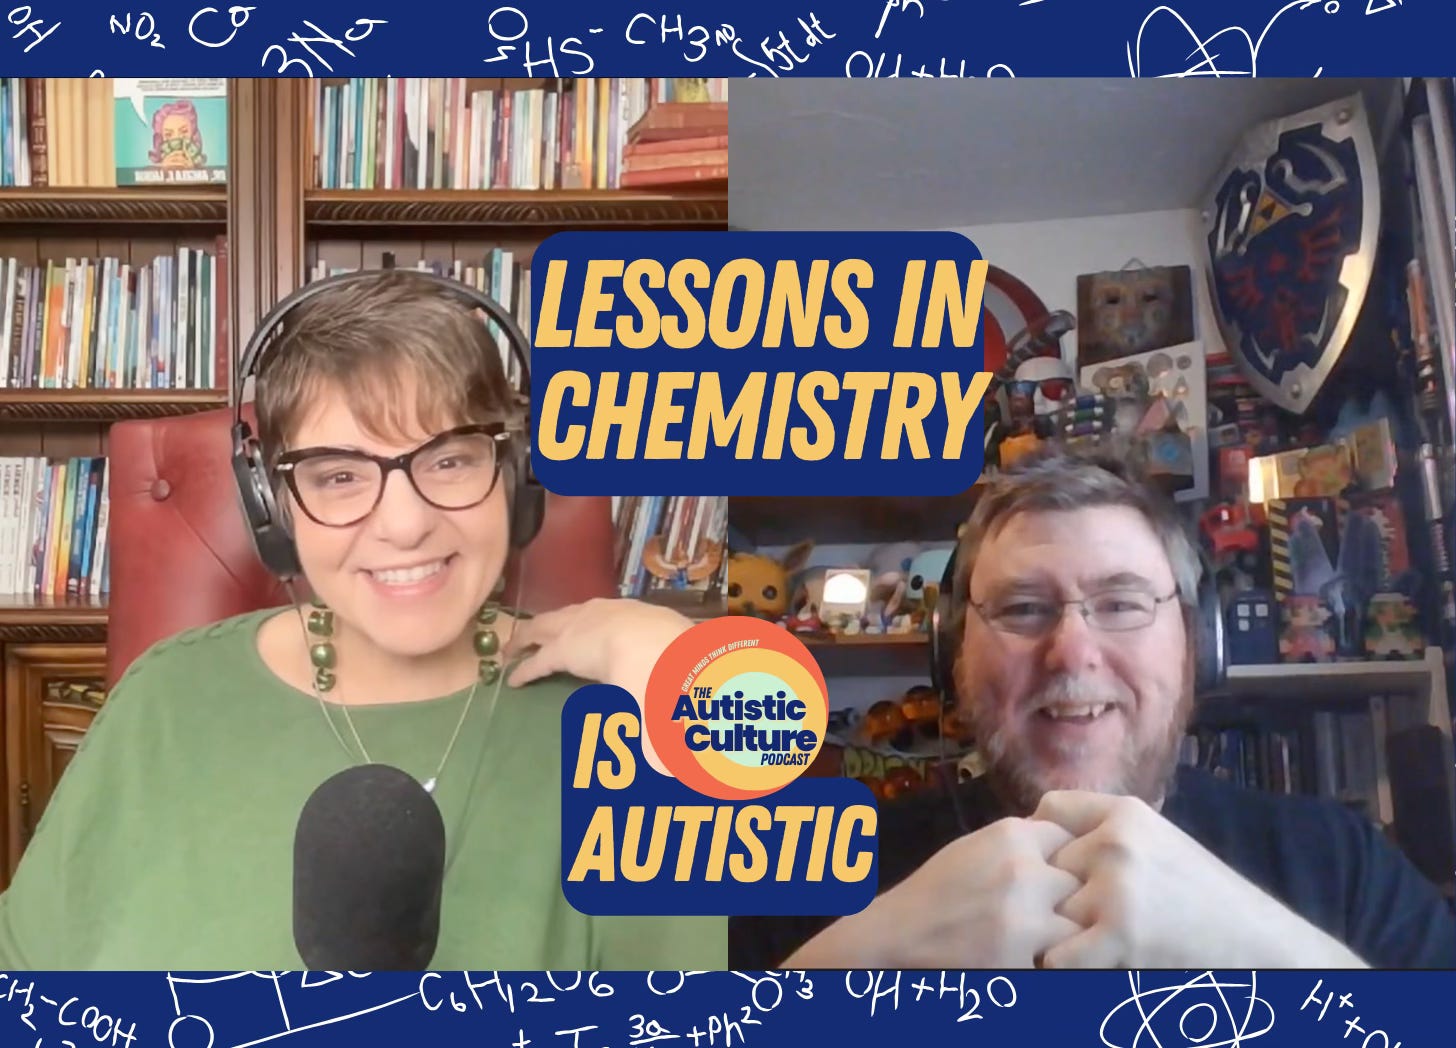 Listen to Autistic Podcast hosts discuss: Lessons in Chemistry is Autistic. An authentically Autistic love story. | Discussion includes: autistic traits in women (what Medical World calls symptoms of autism in women), autistic relationships, autistic adults, autistic children, autistic special interests, and justice sensitivity.